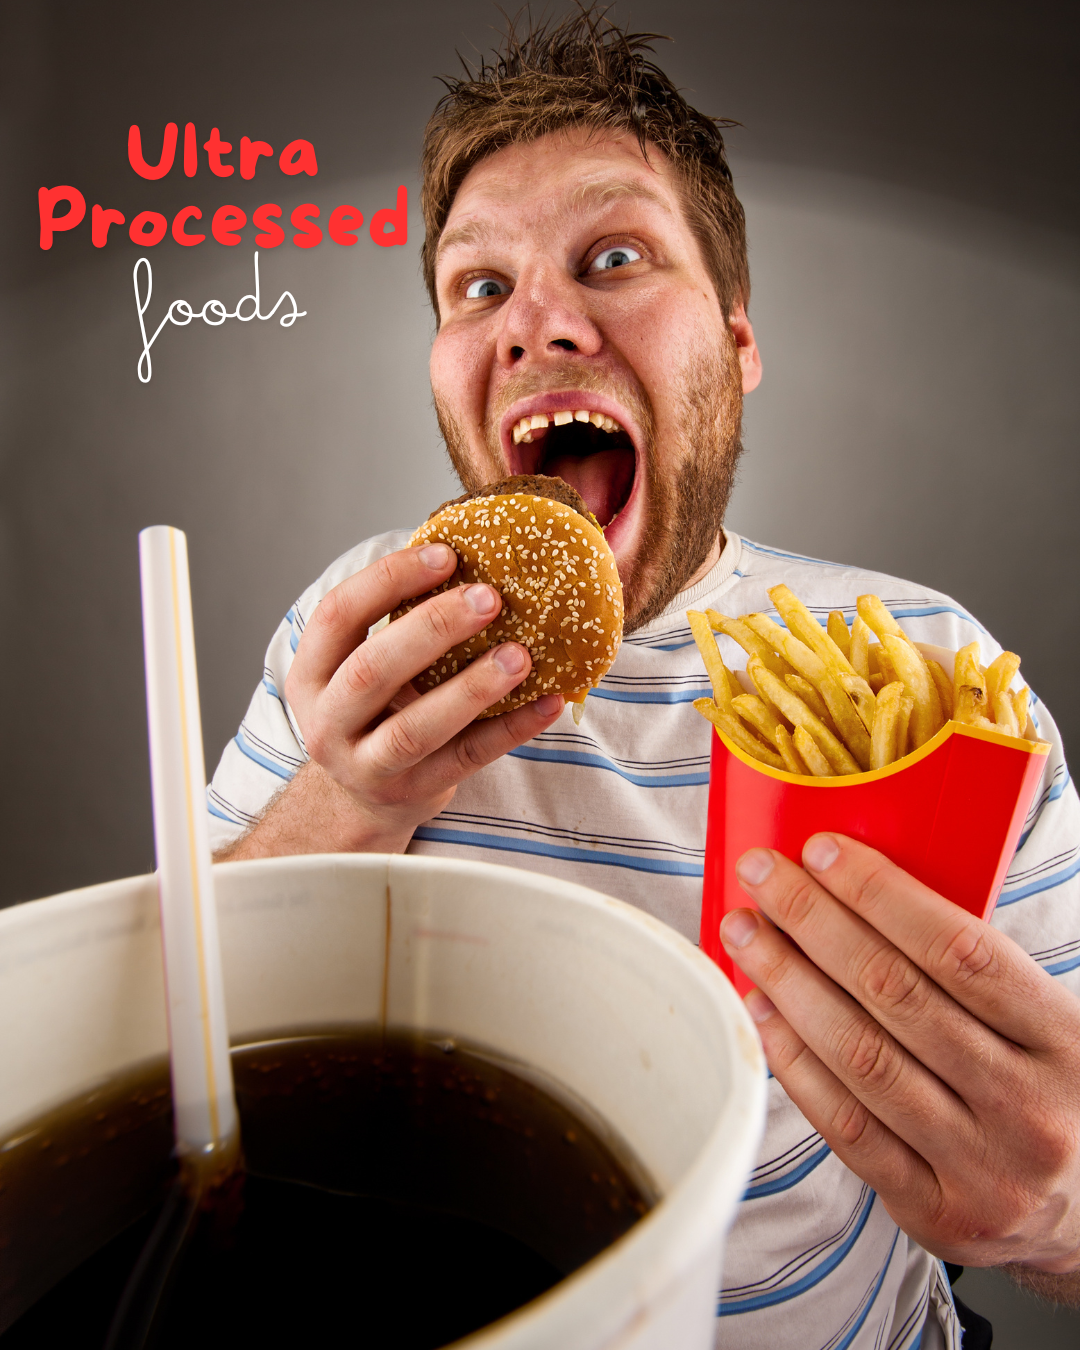 Man stuffing his face with Ultra-processed foods